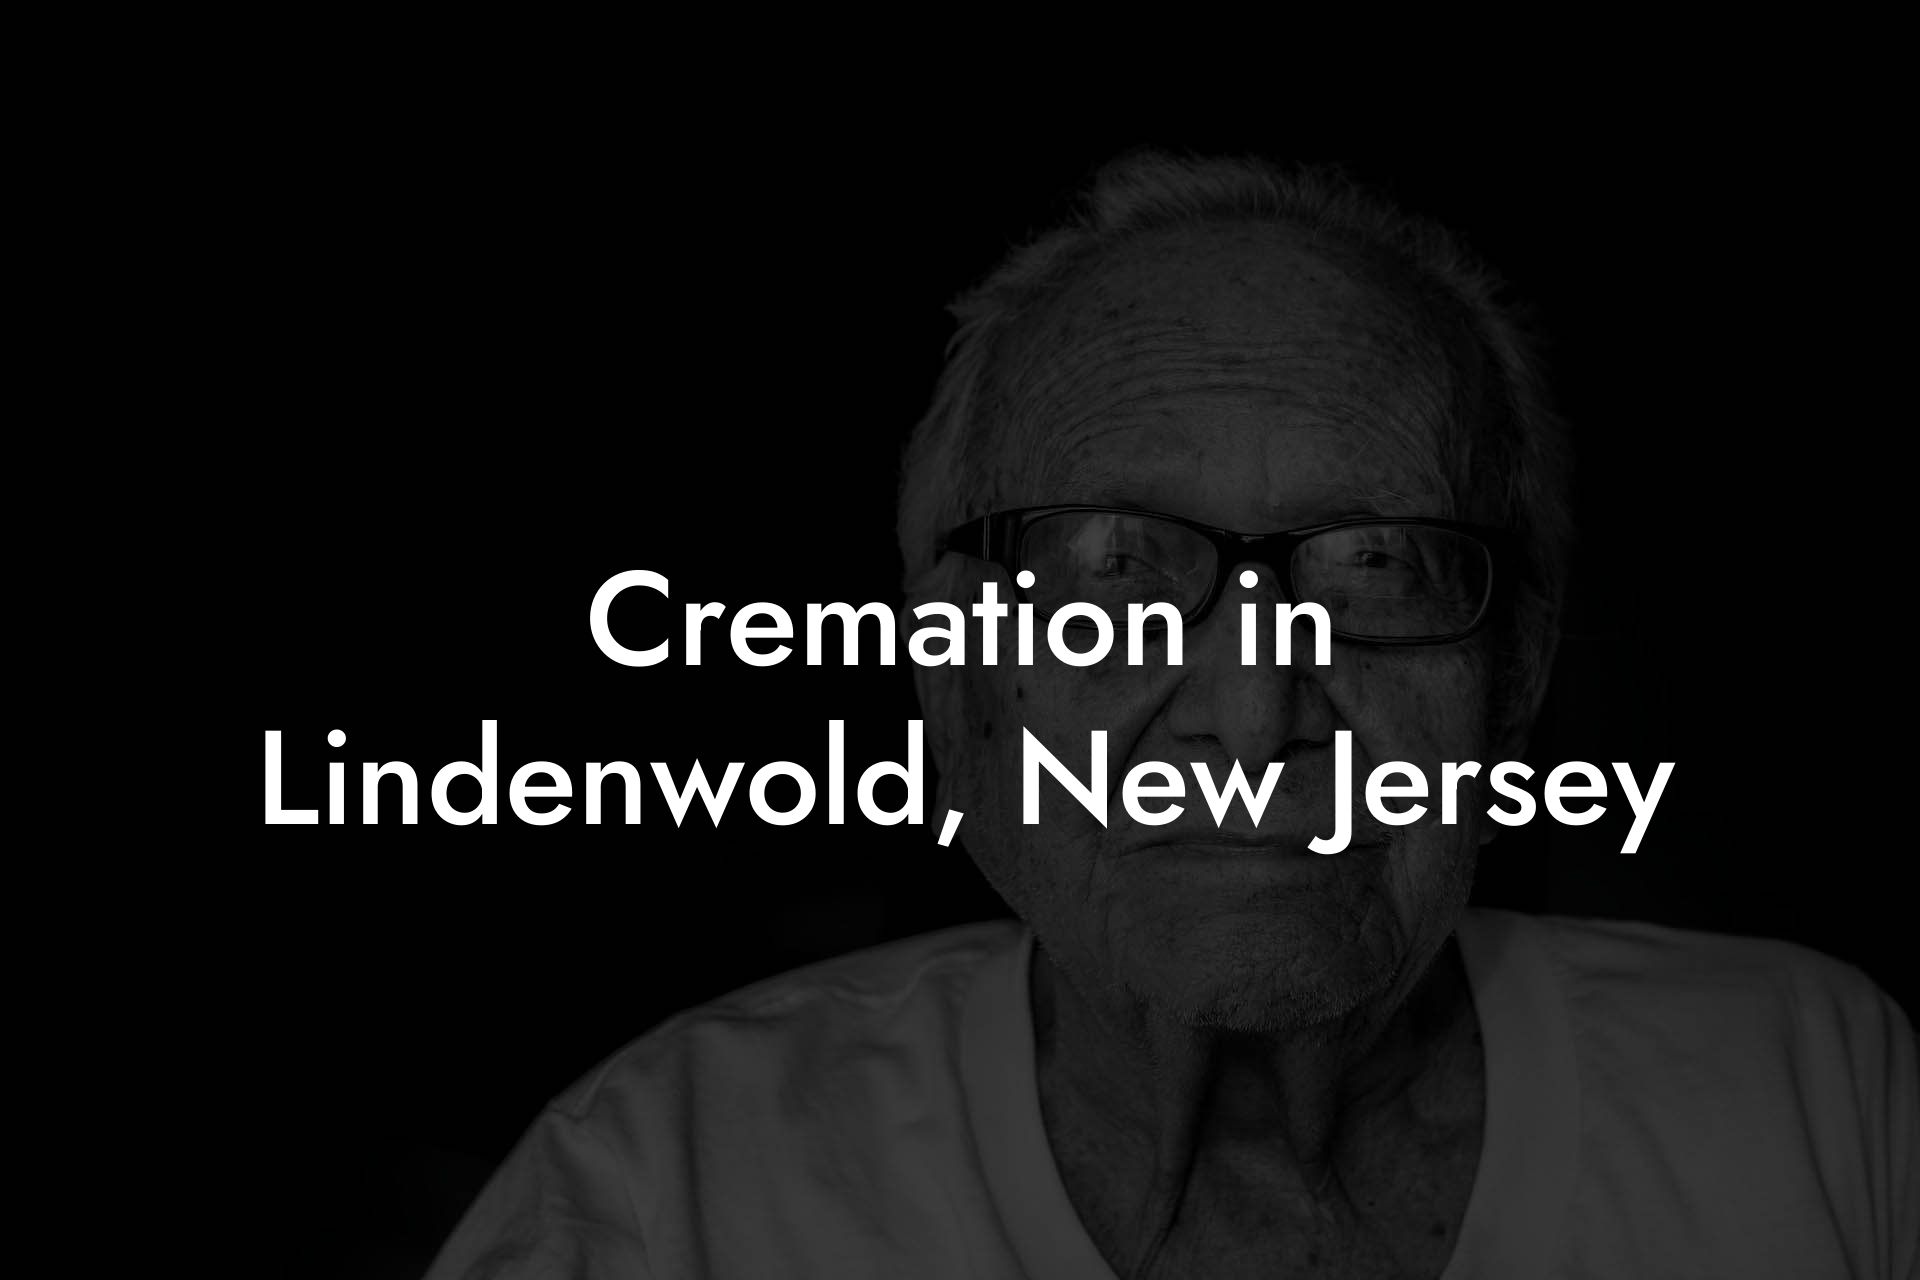 Cremation in Lindenwold, New Jersey